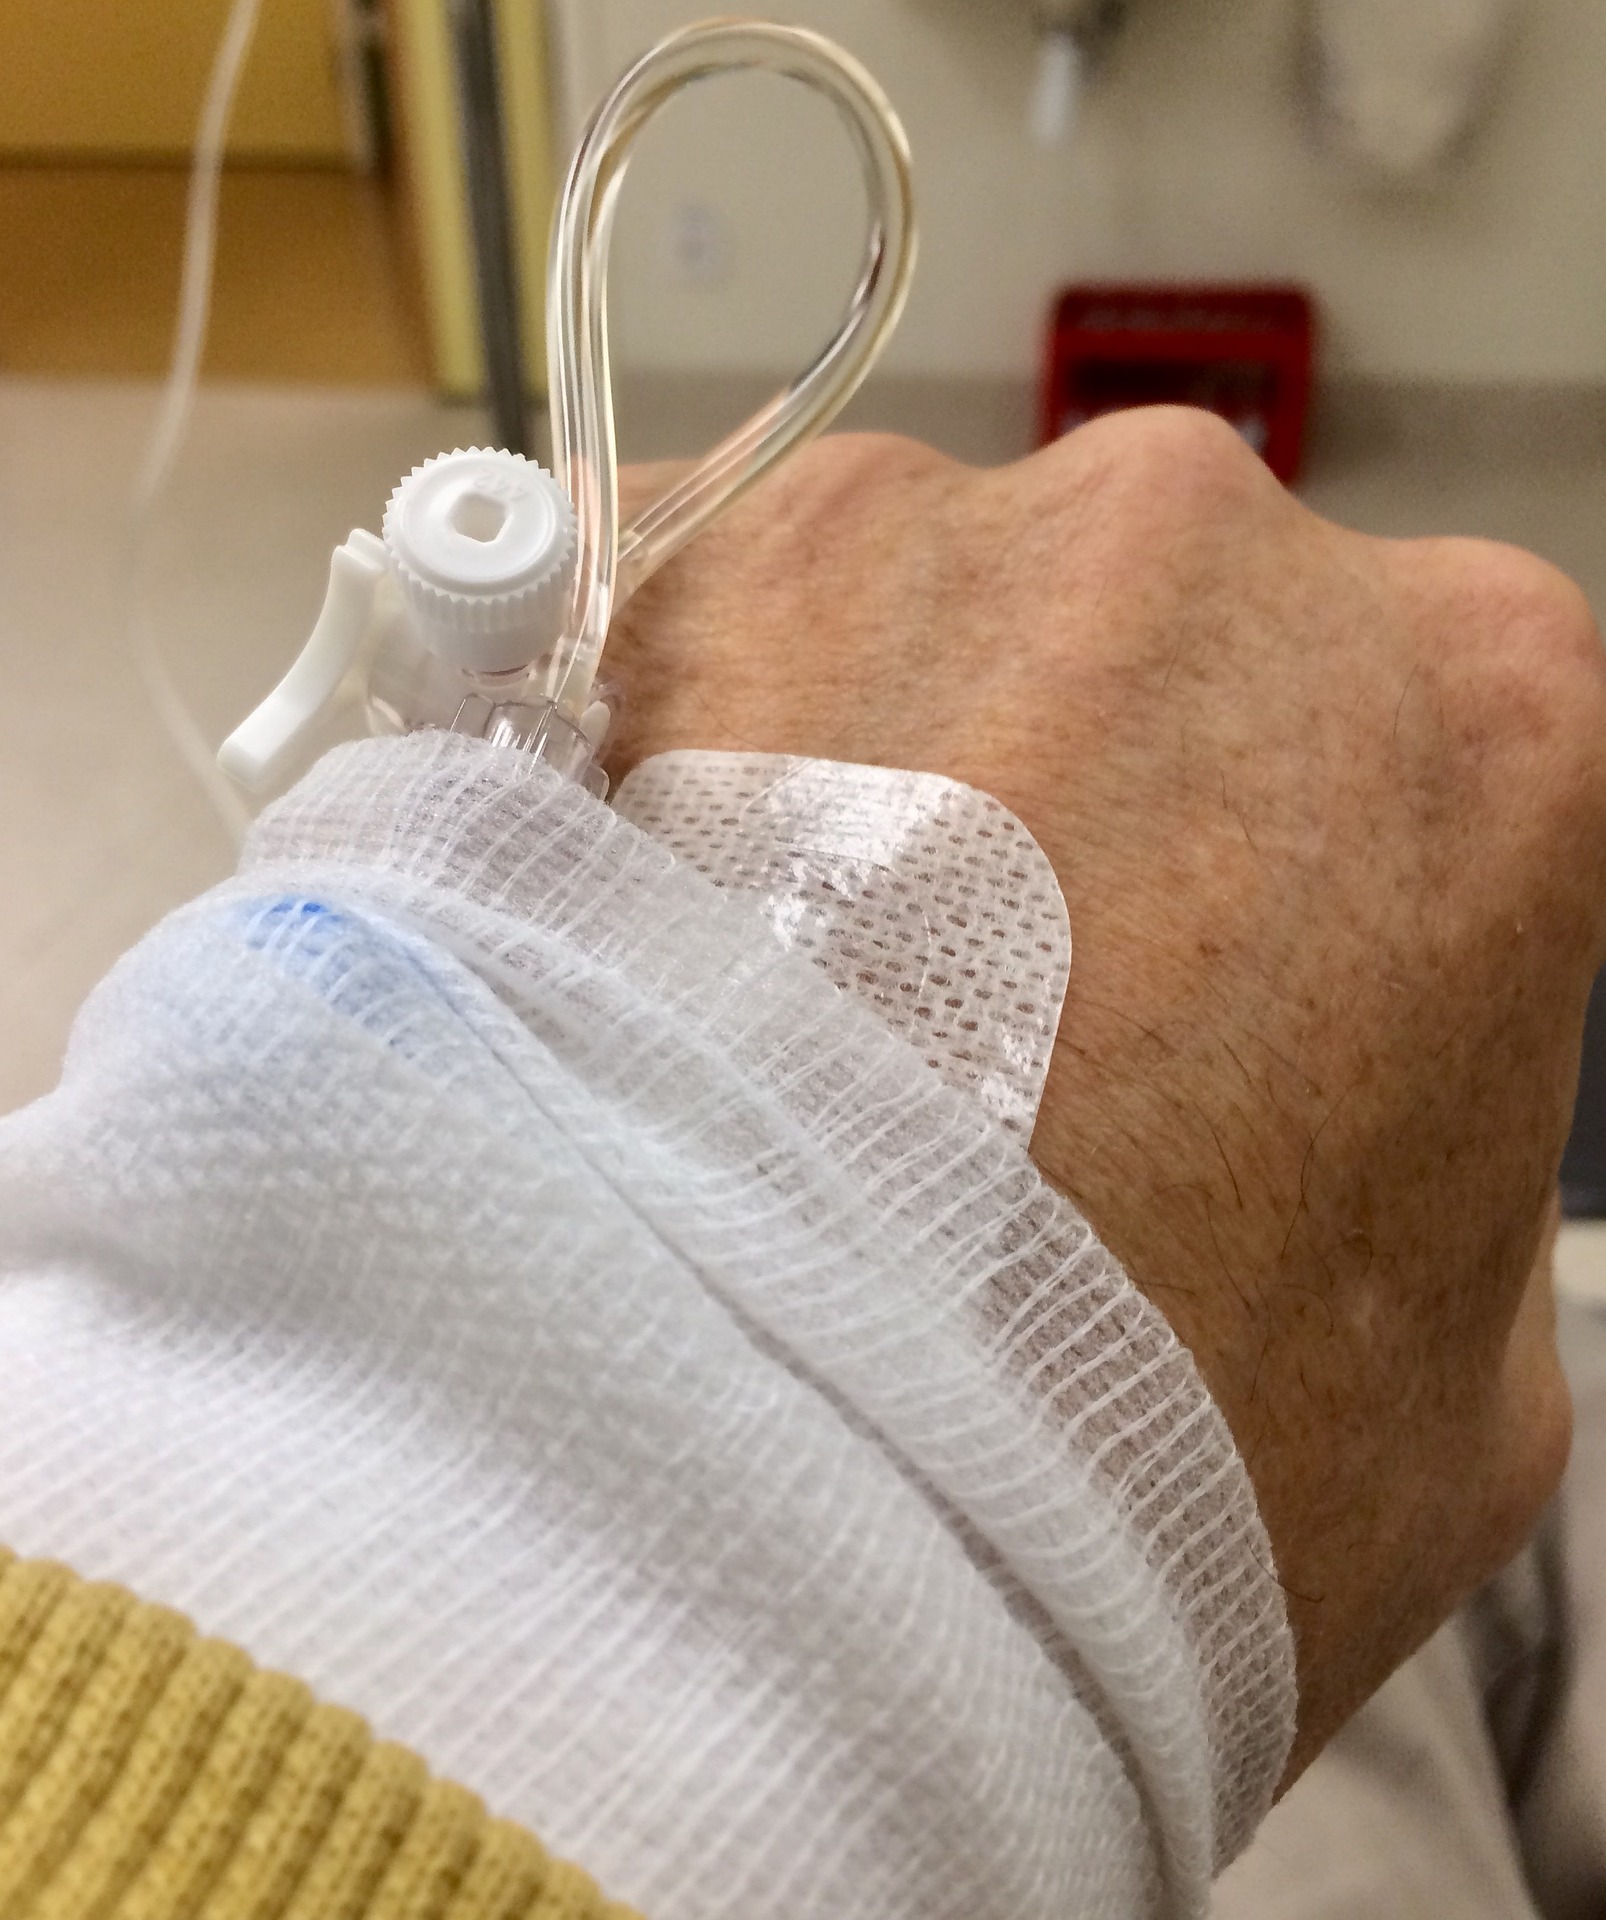 shows a man's hand with cannula for a drip